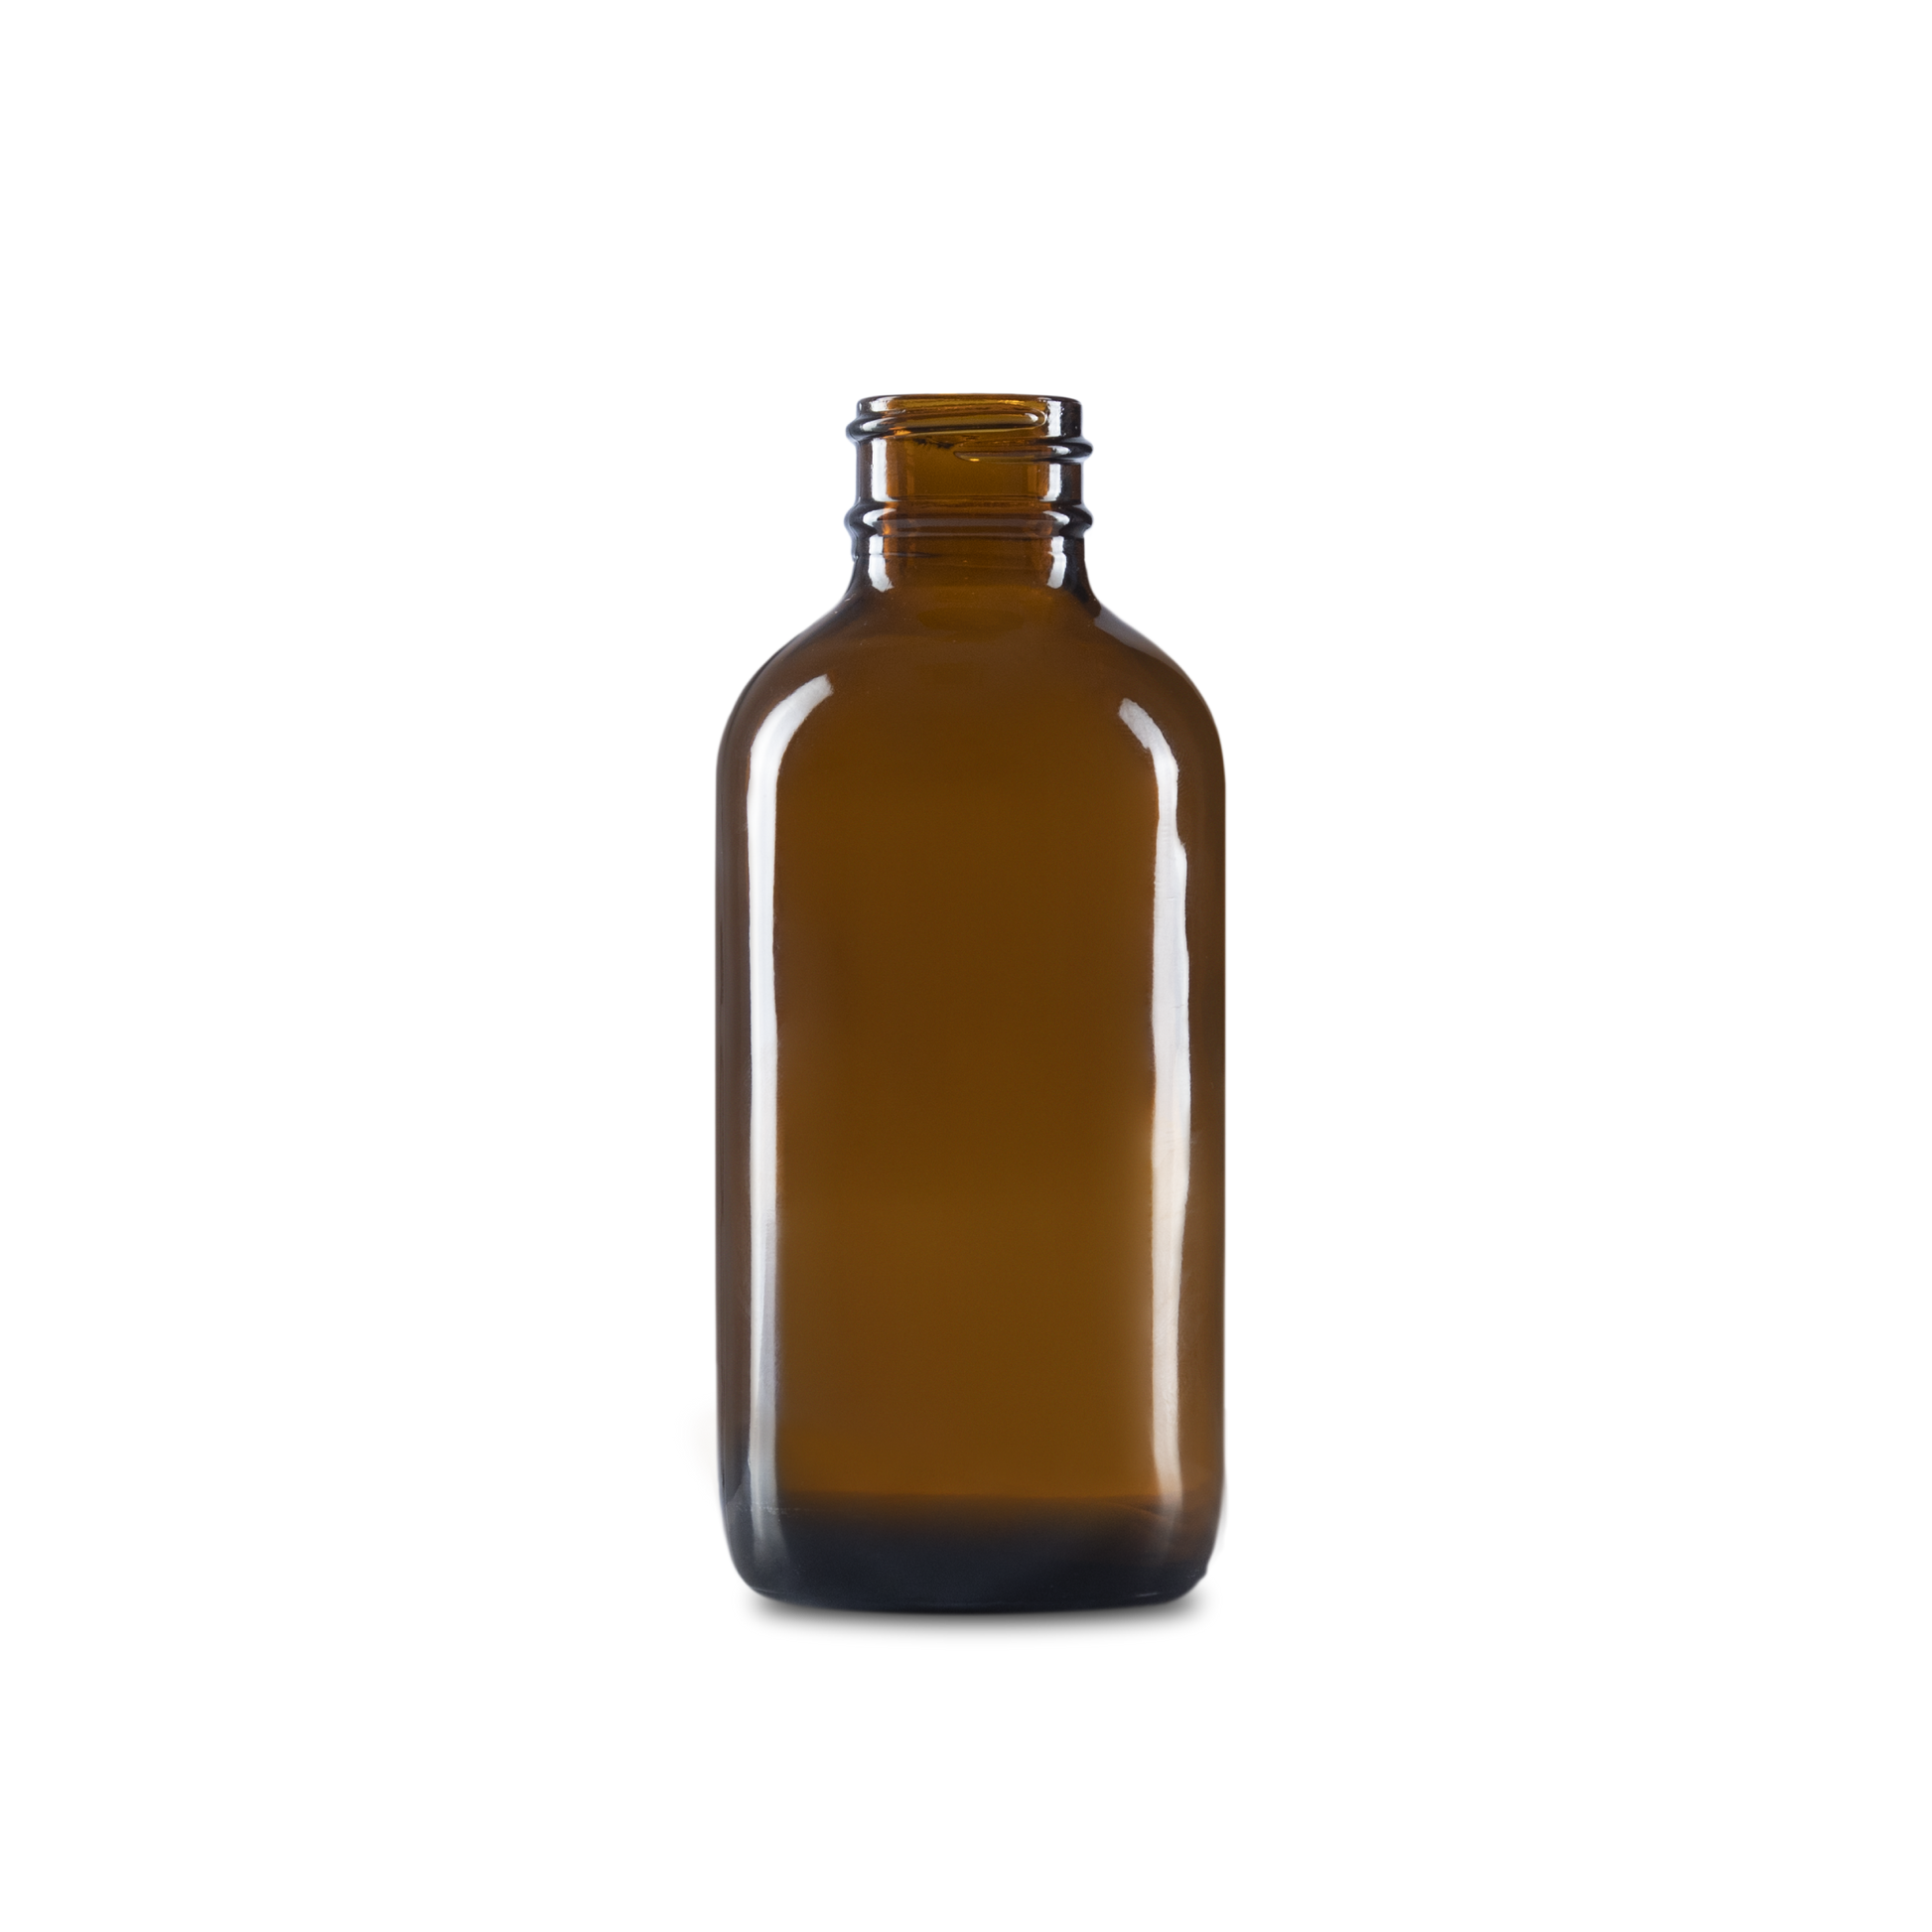 4 oz amber boston round glass bottle helps to protect the contents from exposure, which can cause the product inside to deteriorate.